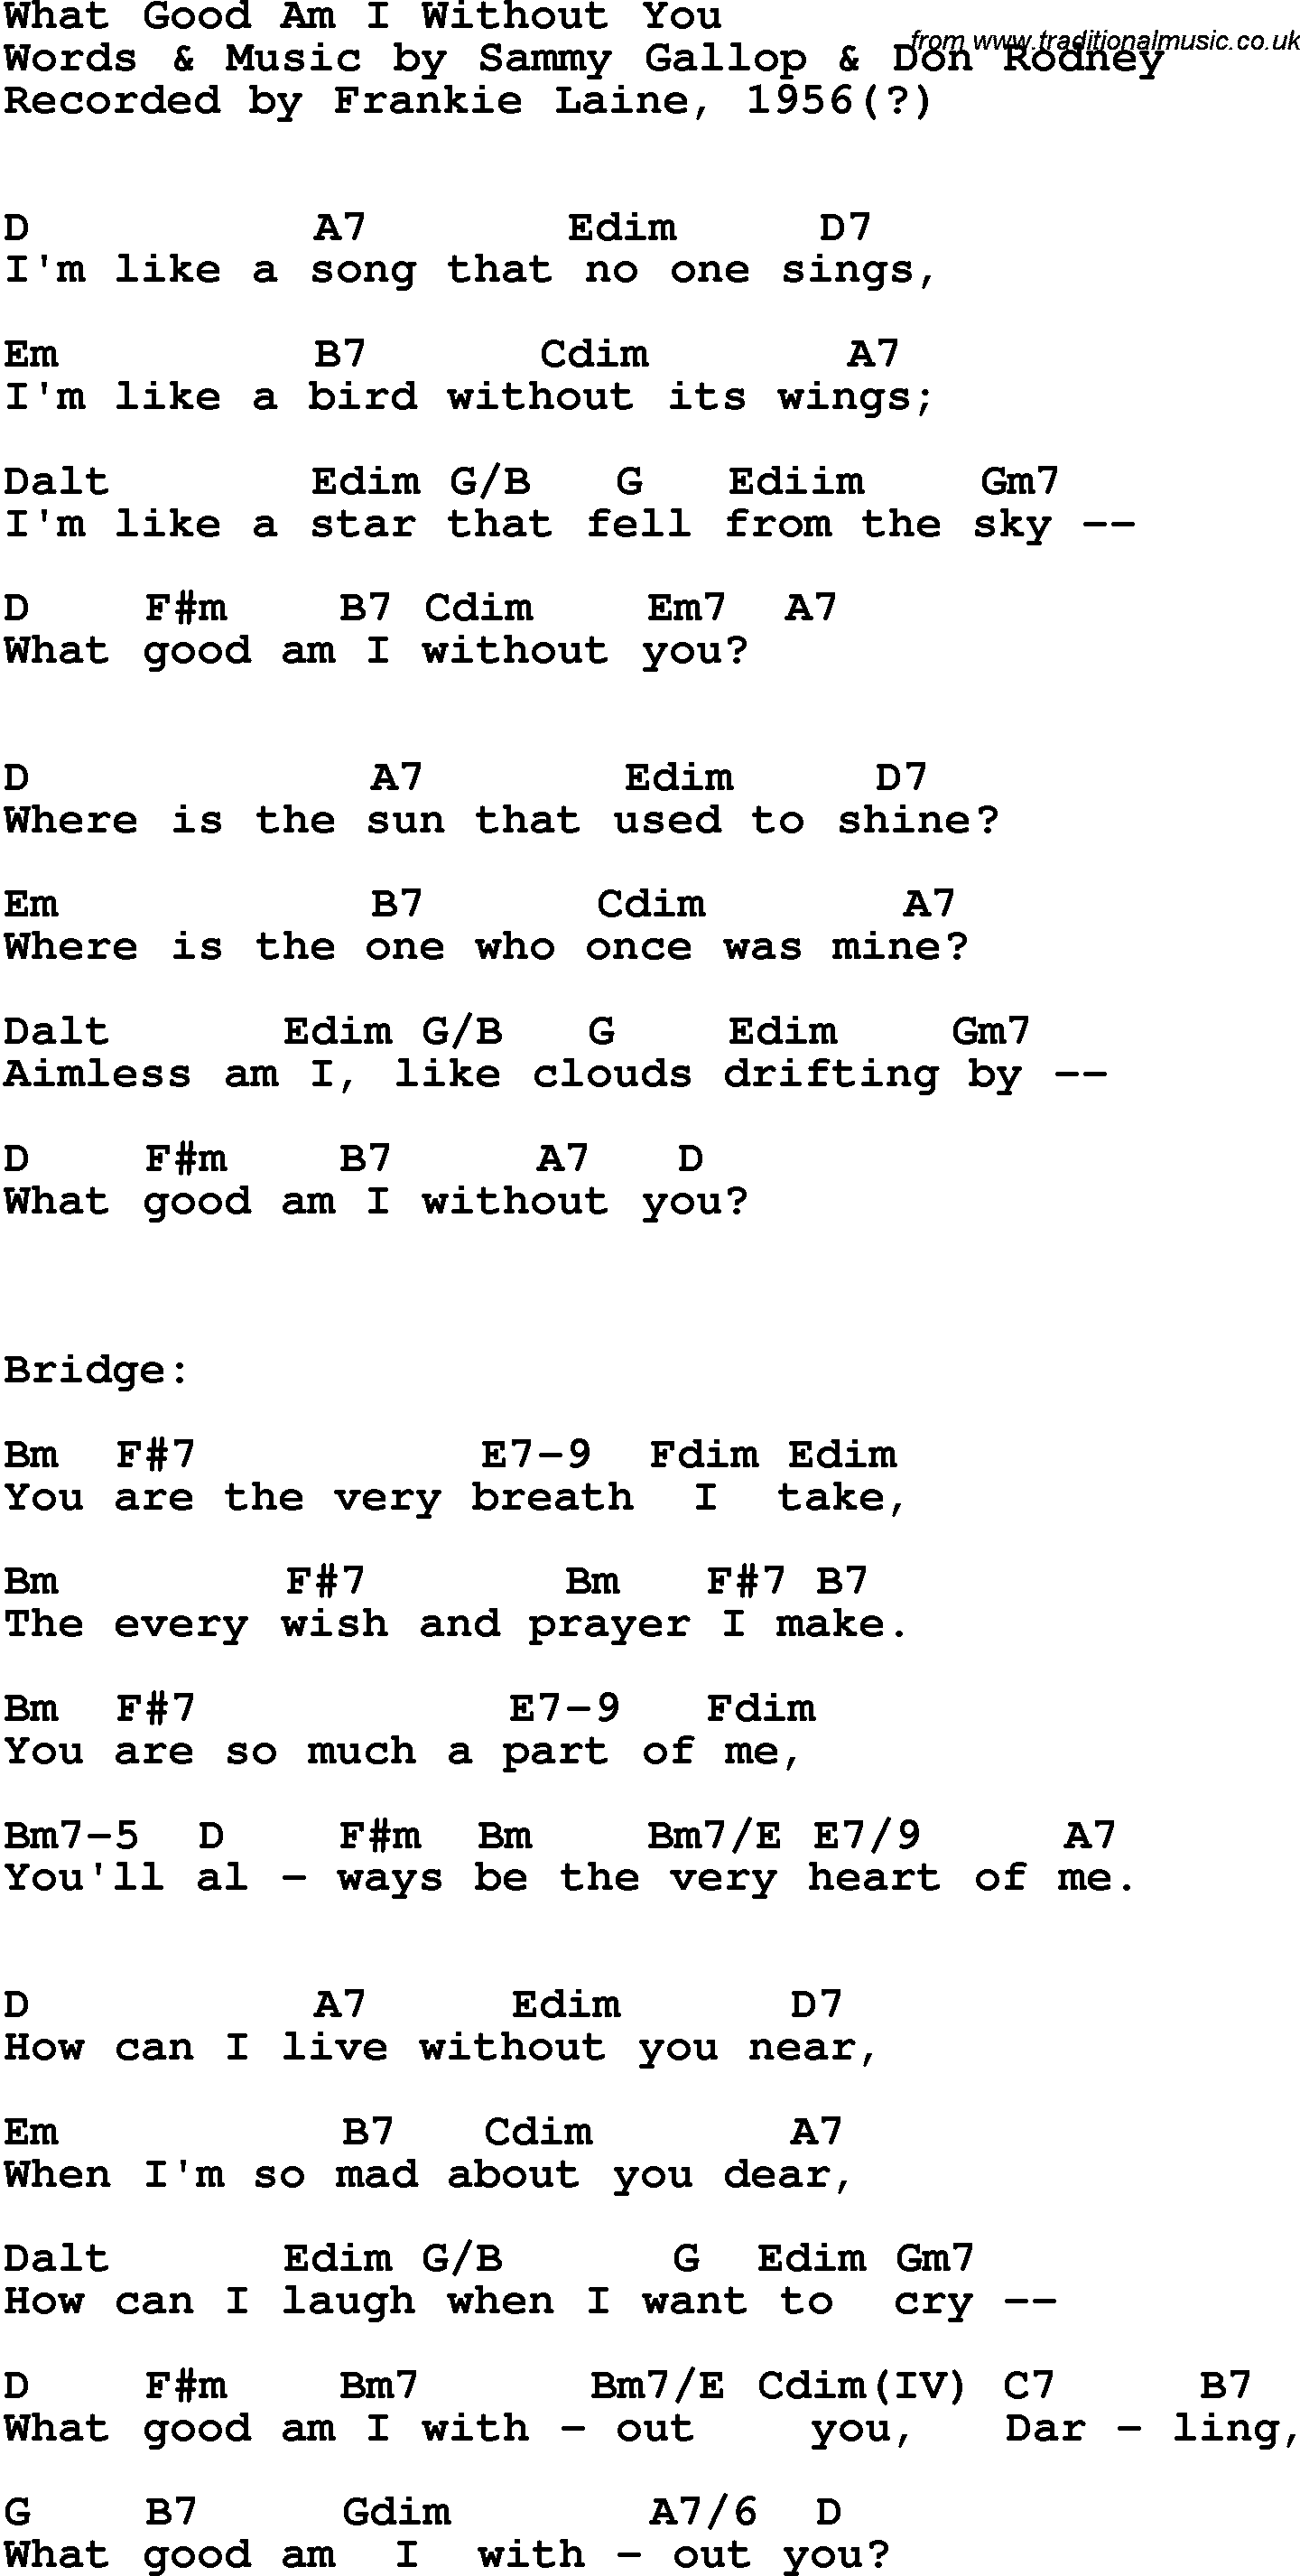 Song Lyrics with guitar chords for What Good Am I Without You - Frankie Laine 1956